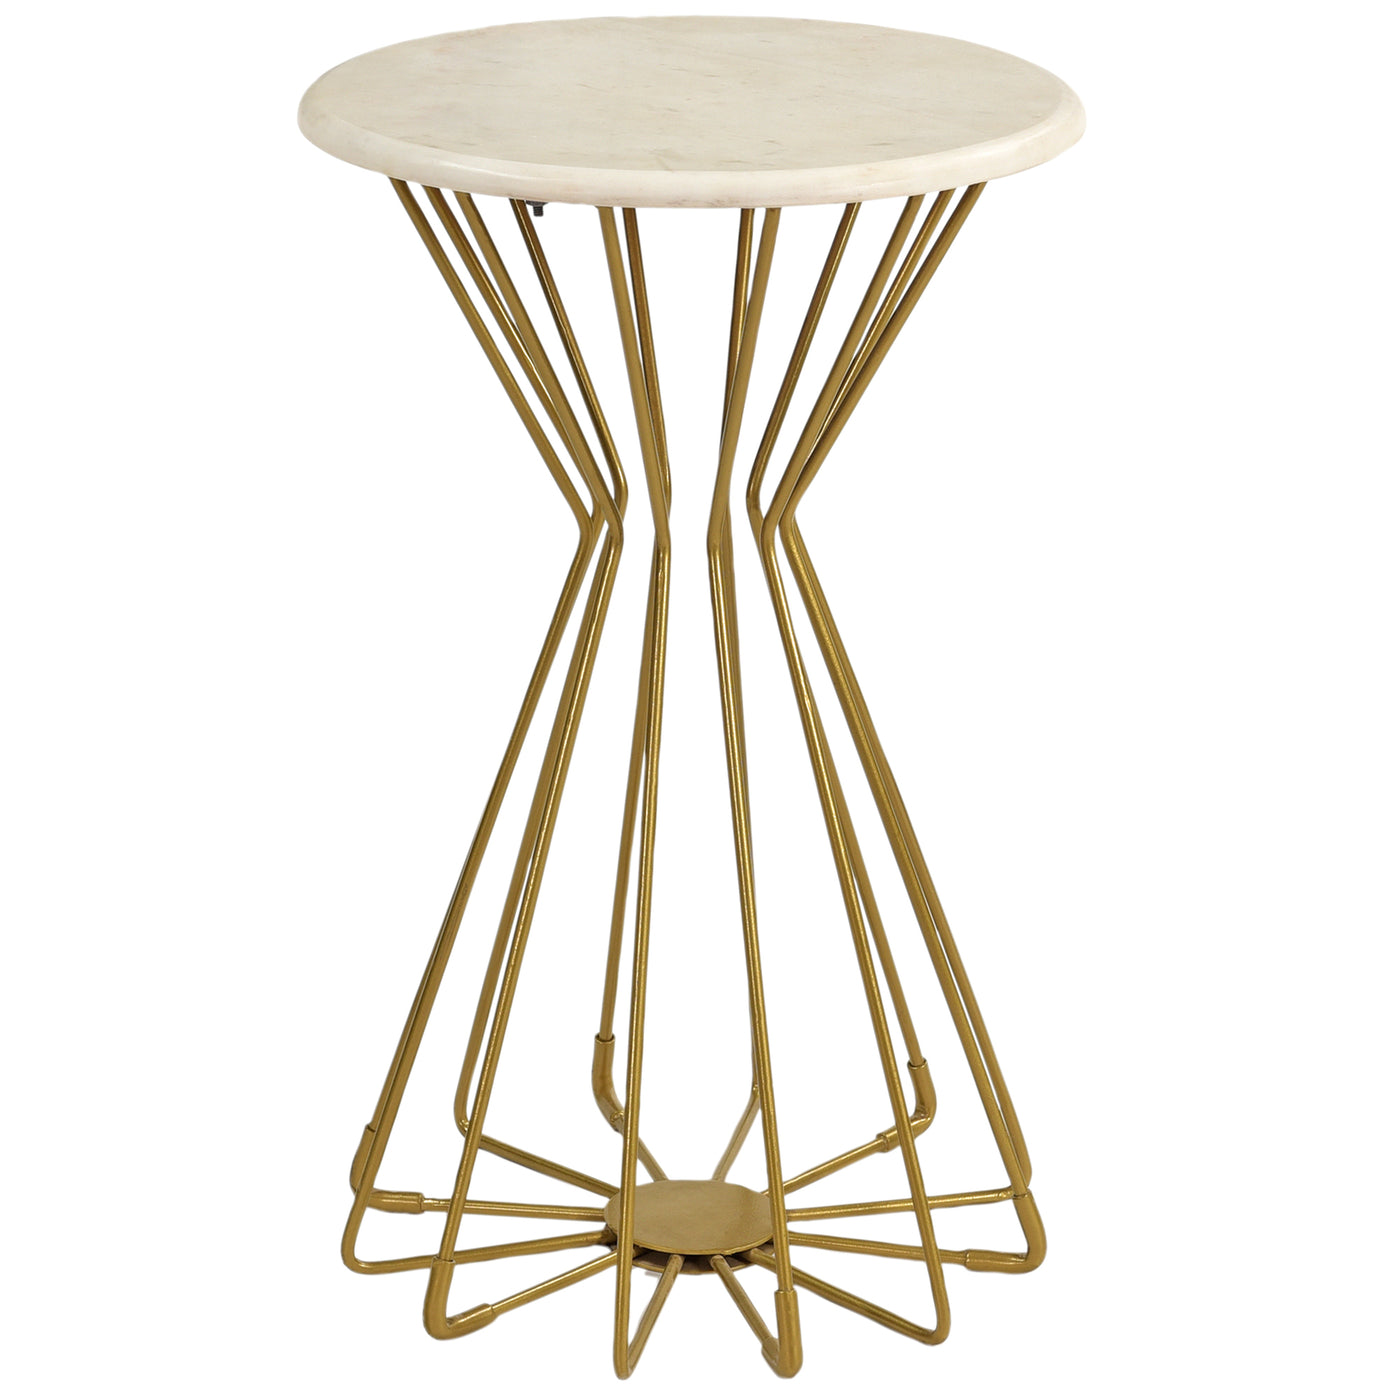 FirsTime & Co. Gold Layla Marble End Table, Modern Style, Made of Marble